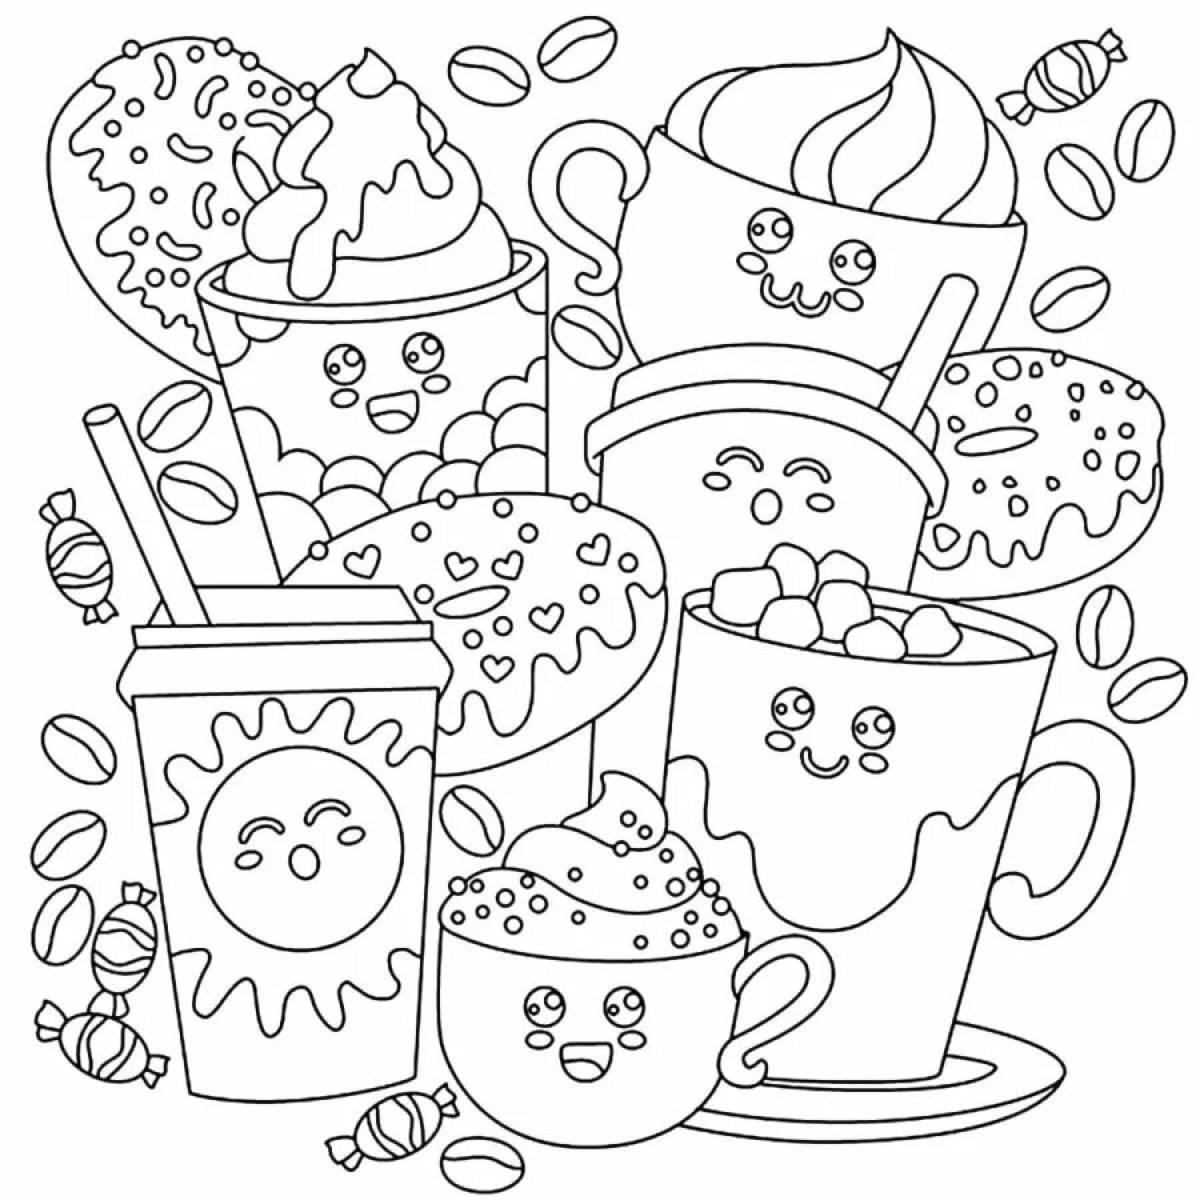 Gourmet sweets coloring pages for girls